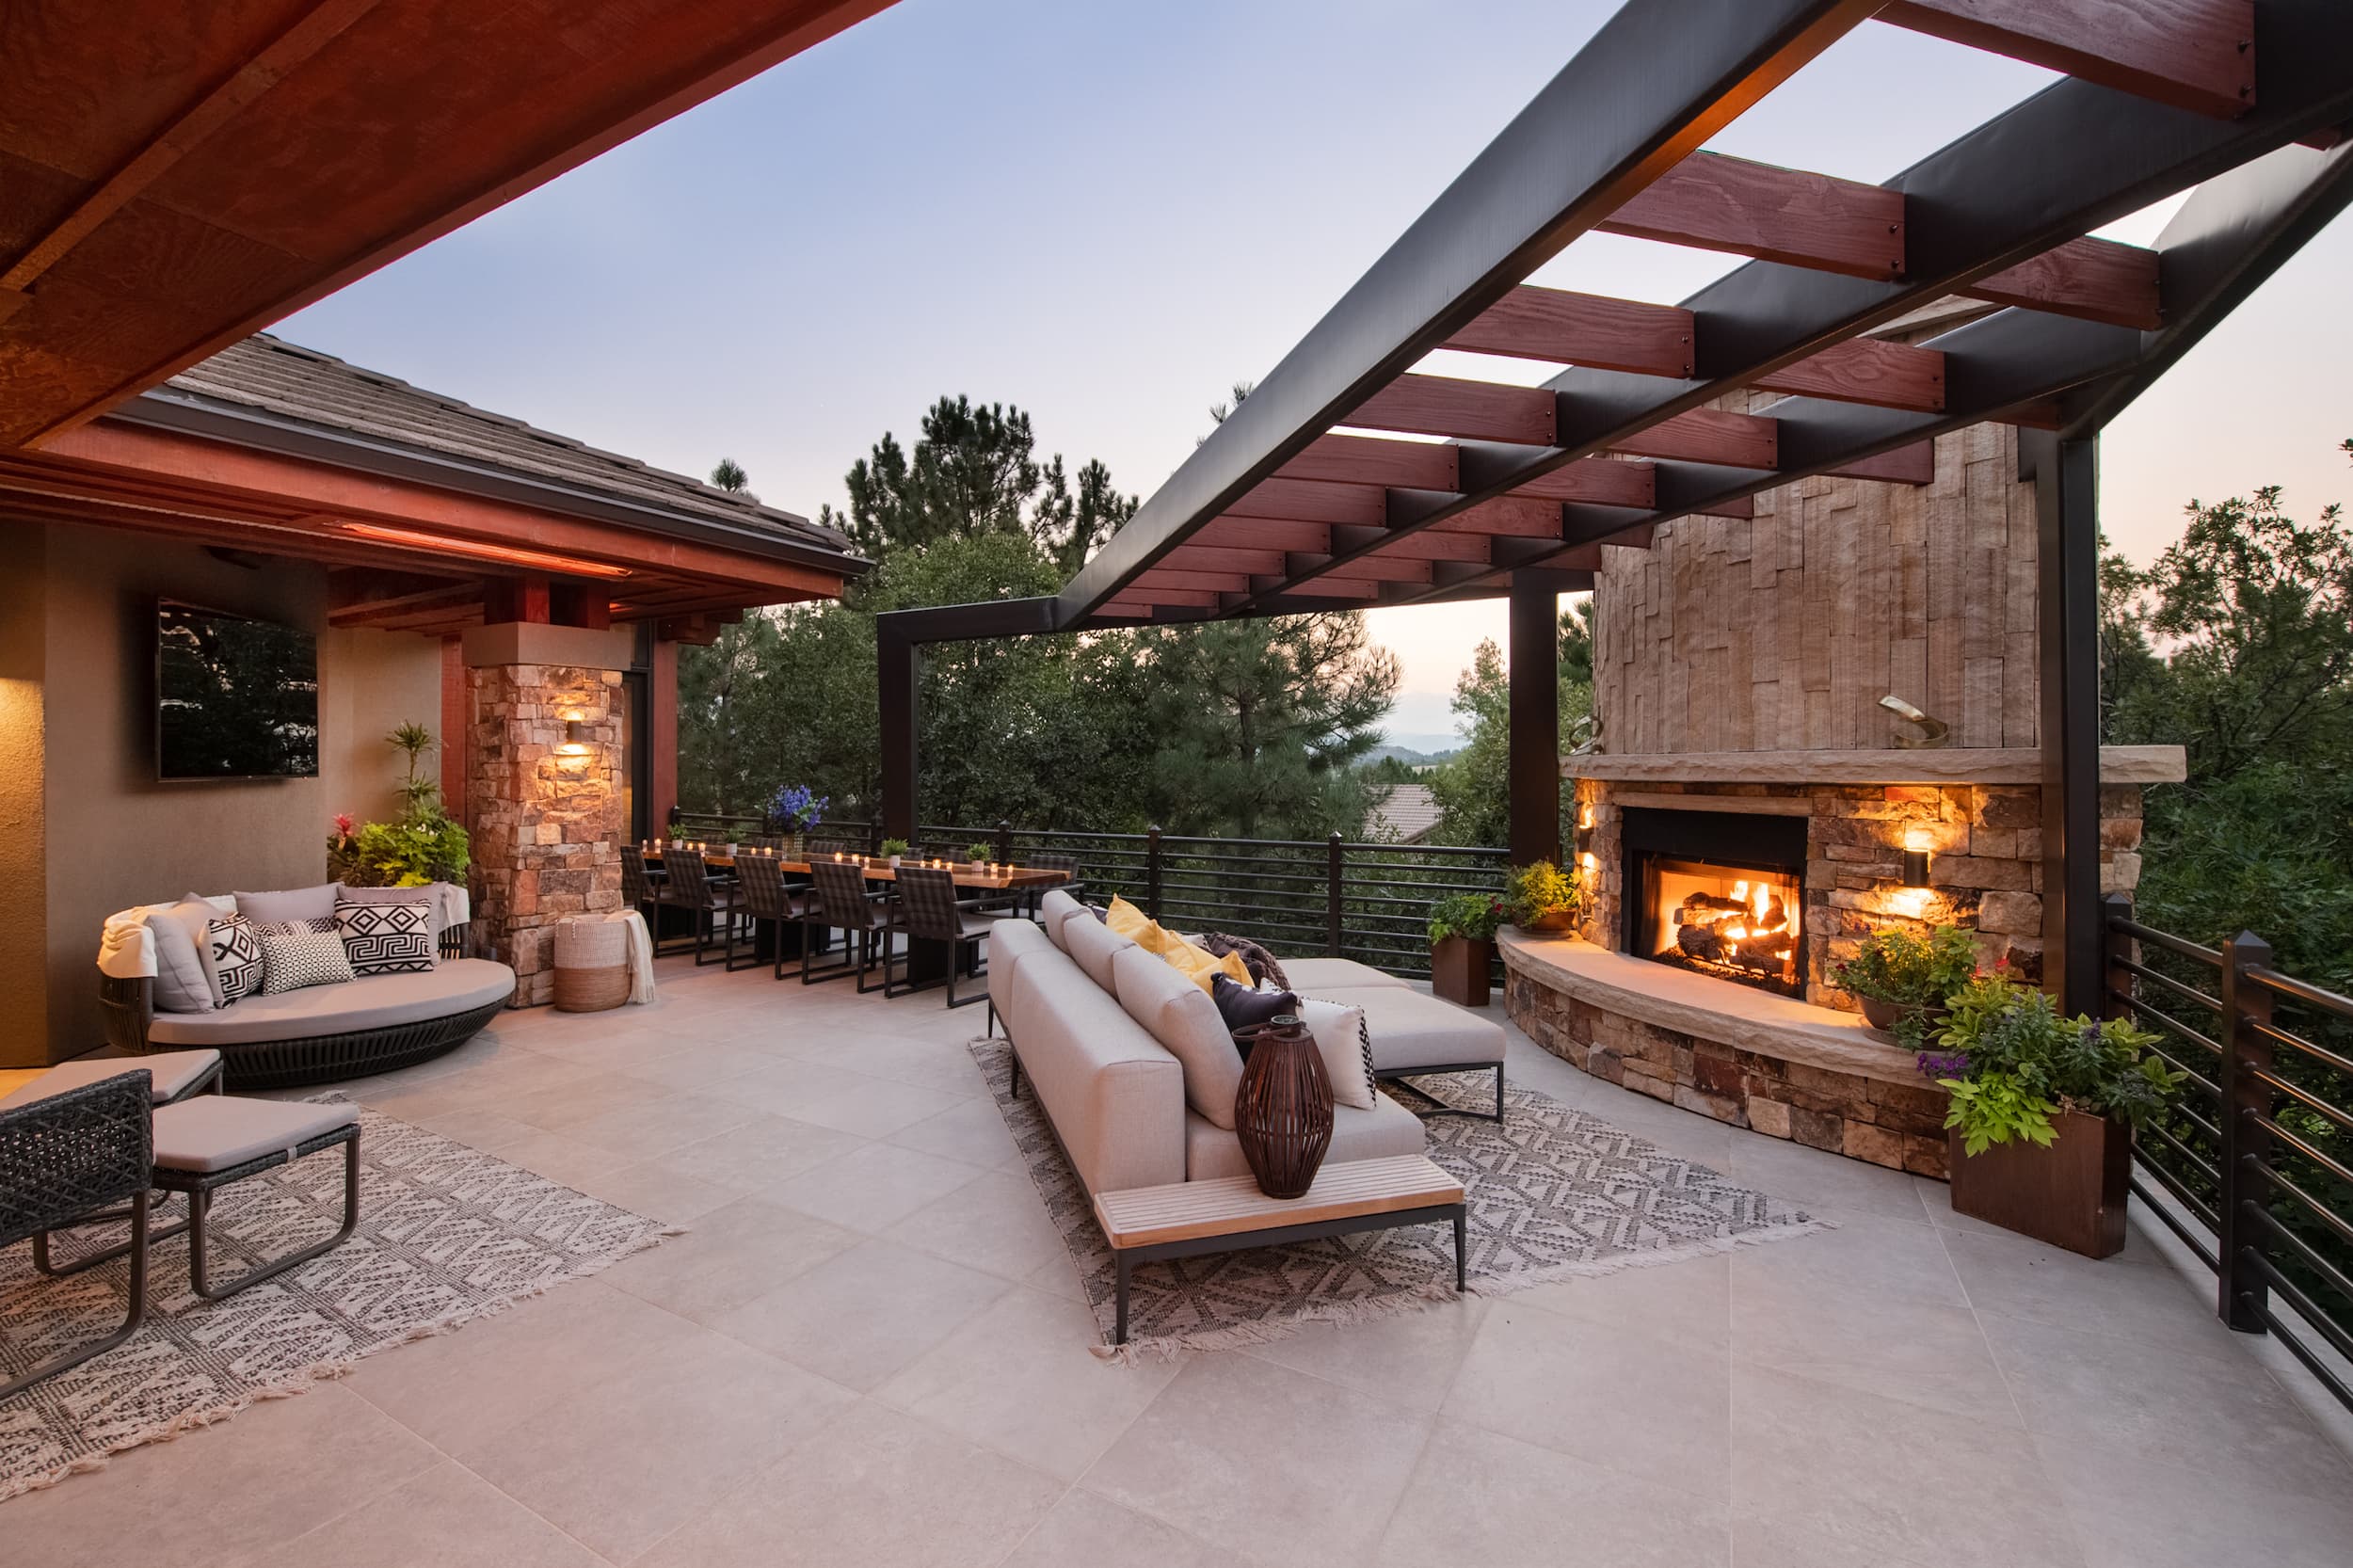 An outdoor living area with a fireplace and patio furniture.